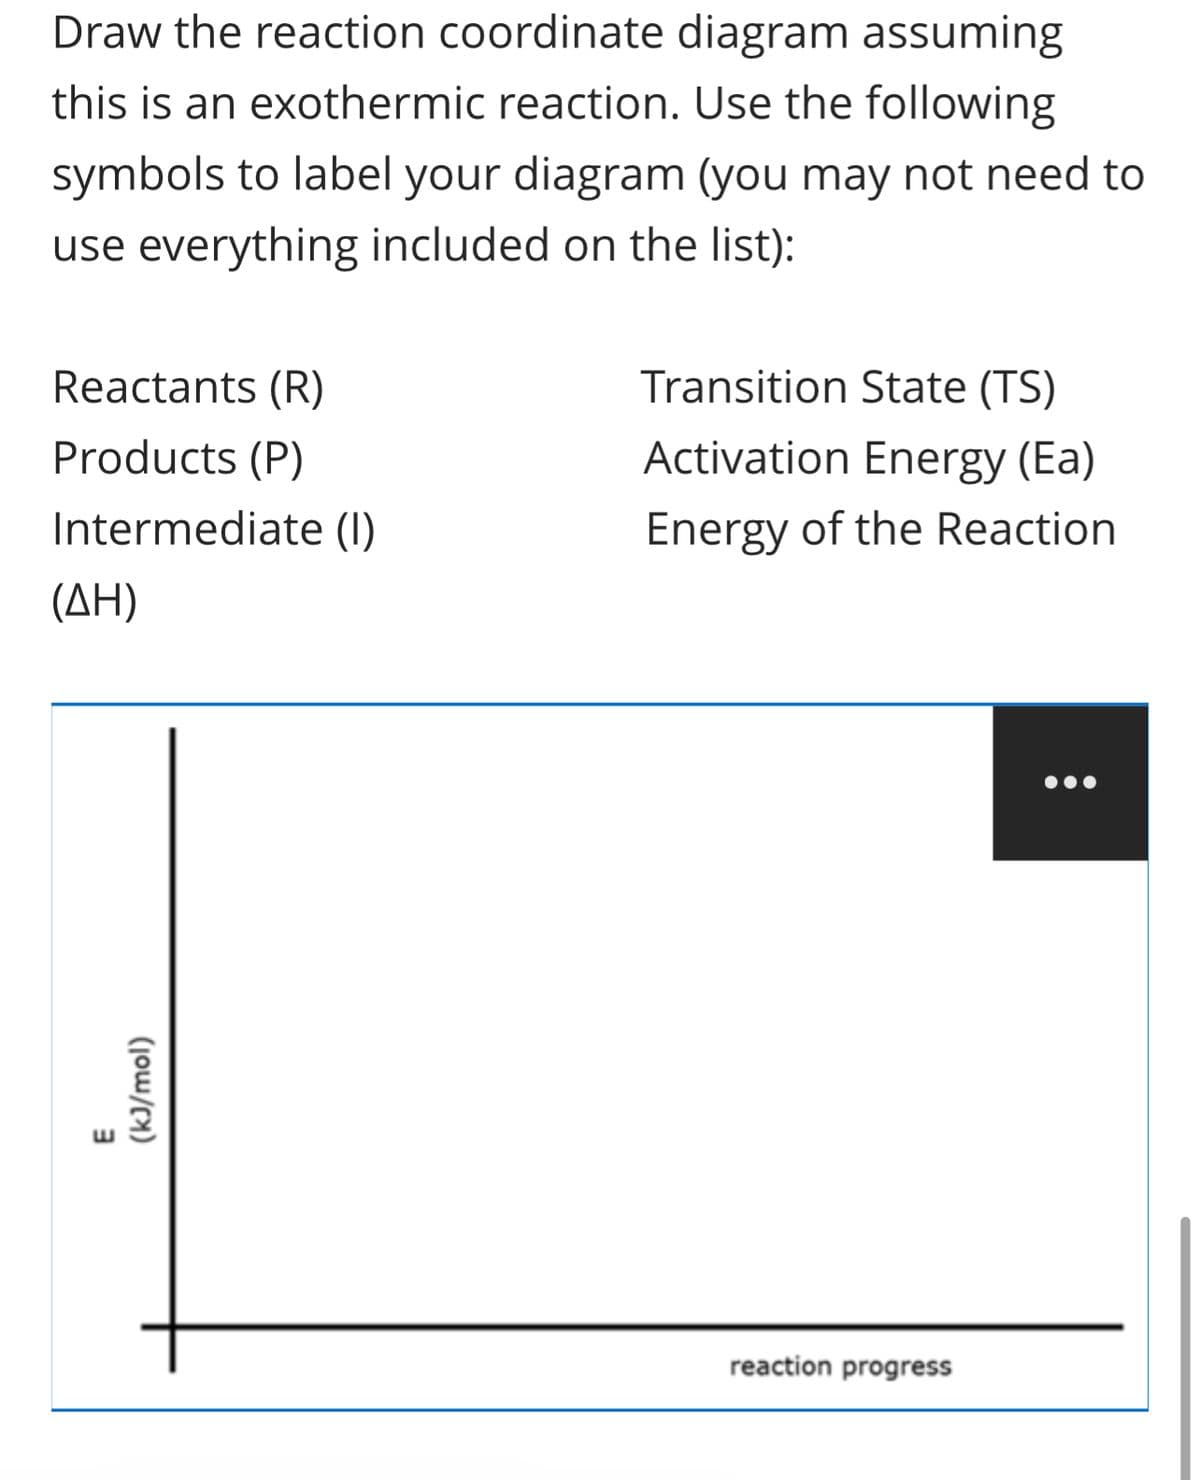 Draw the reaction coordinate diagram assuming
this is an exothermic reaction. Use the following
symbols to label your diagram (you may not need to
use everything included on the list):
Reactants (R)
Products (P)
Intermediate (1)
(AH)
(kJ/mol)
E
Transition State (TS)
Activation Energy (Ea)
Energy of the Reaction
reaction progress